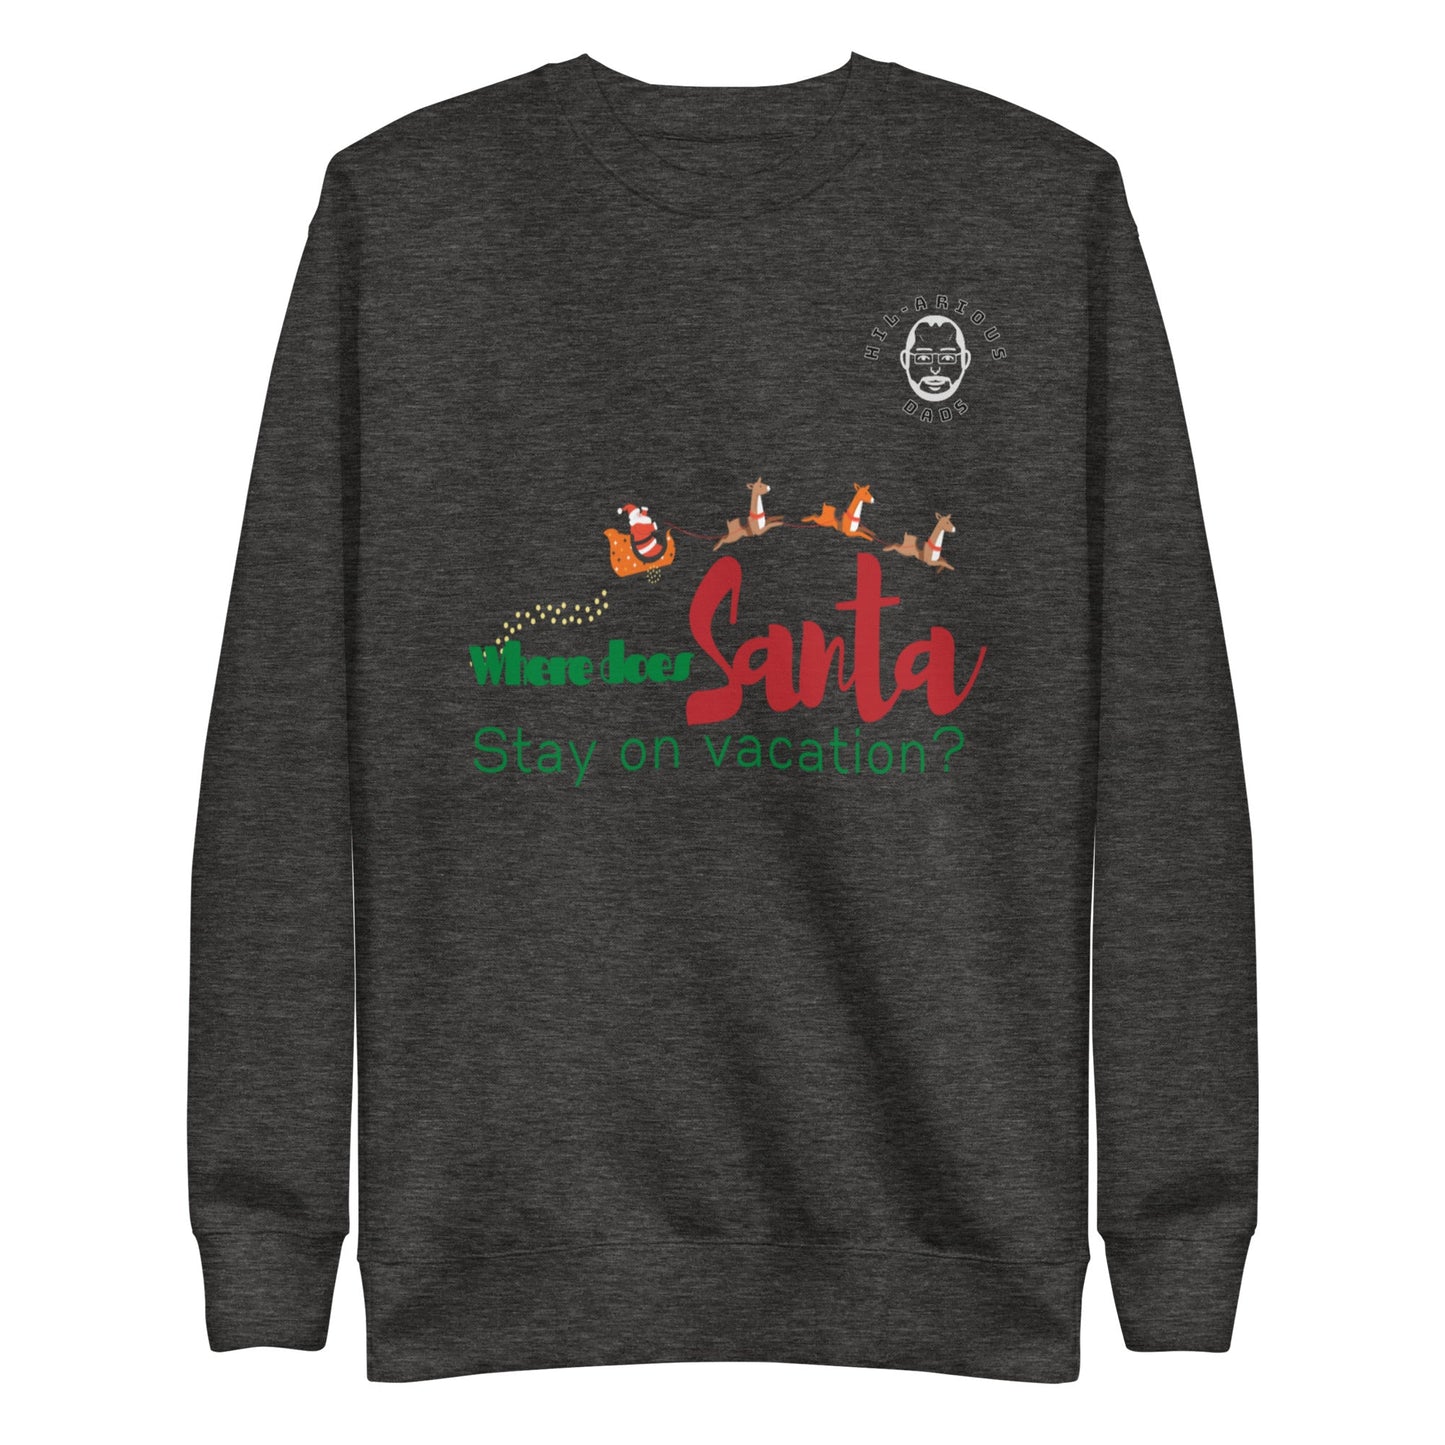 Where does Santa stay on vacation?-Sweatshirt - Hil-arious Dads